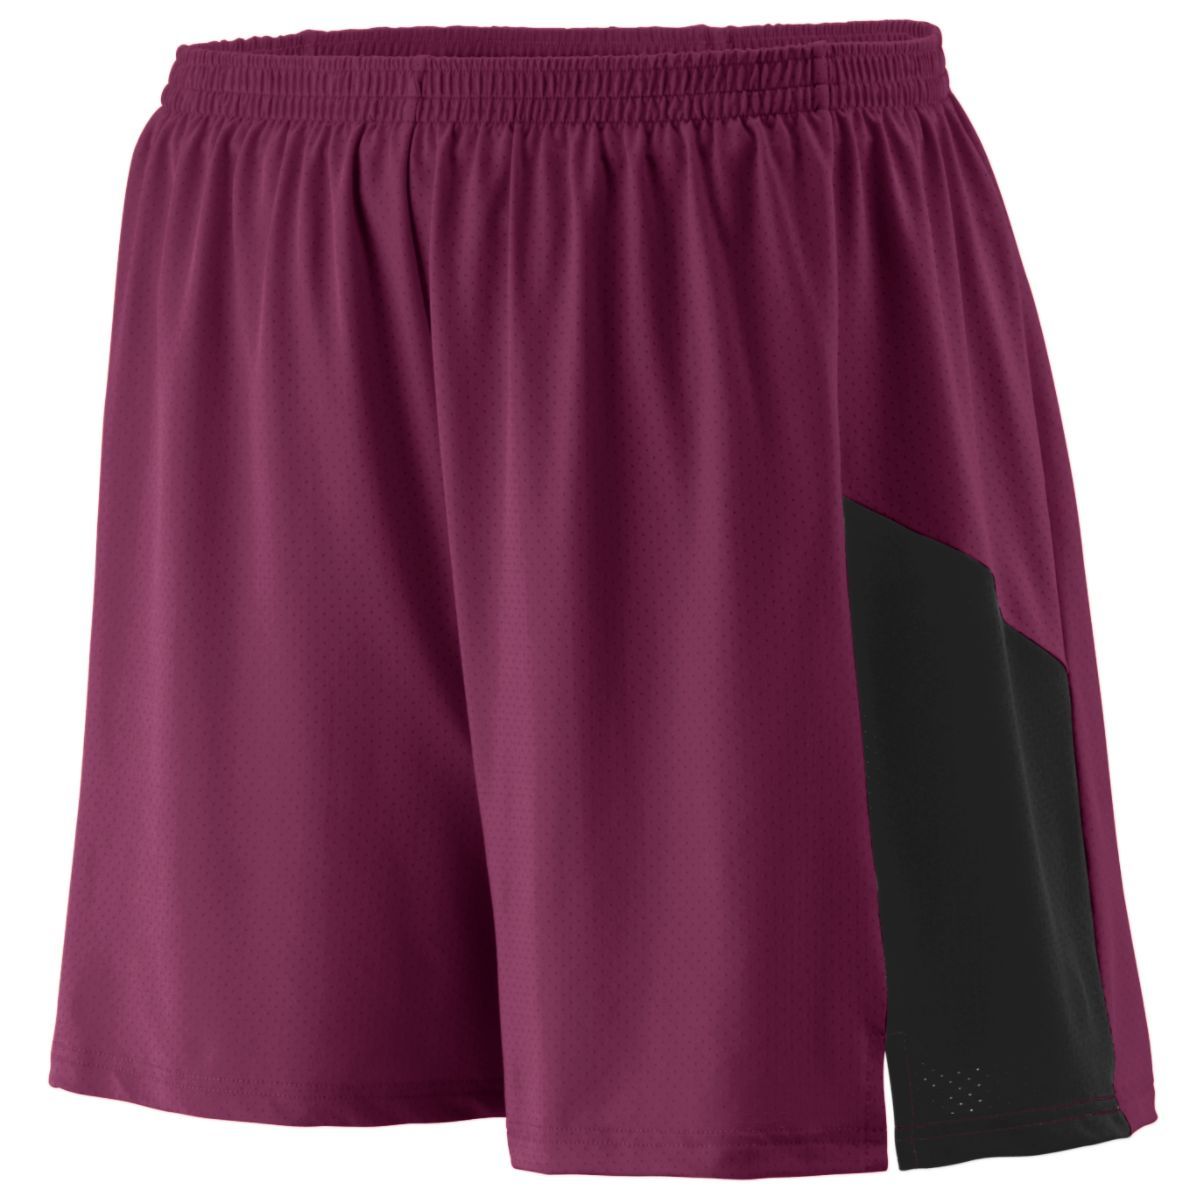 Augusta Sportswear Youth Sprint Shorts in Maroon/Black  -Part of the Youth, Youth-Shorts, Augusta-Products, Track-Field product lines at KanaleyCreations.com